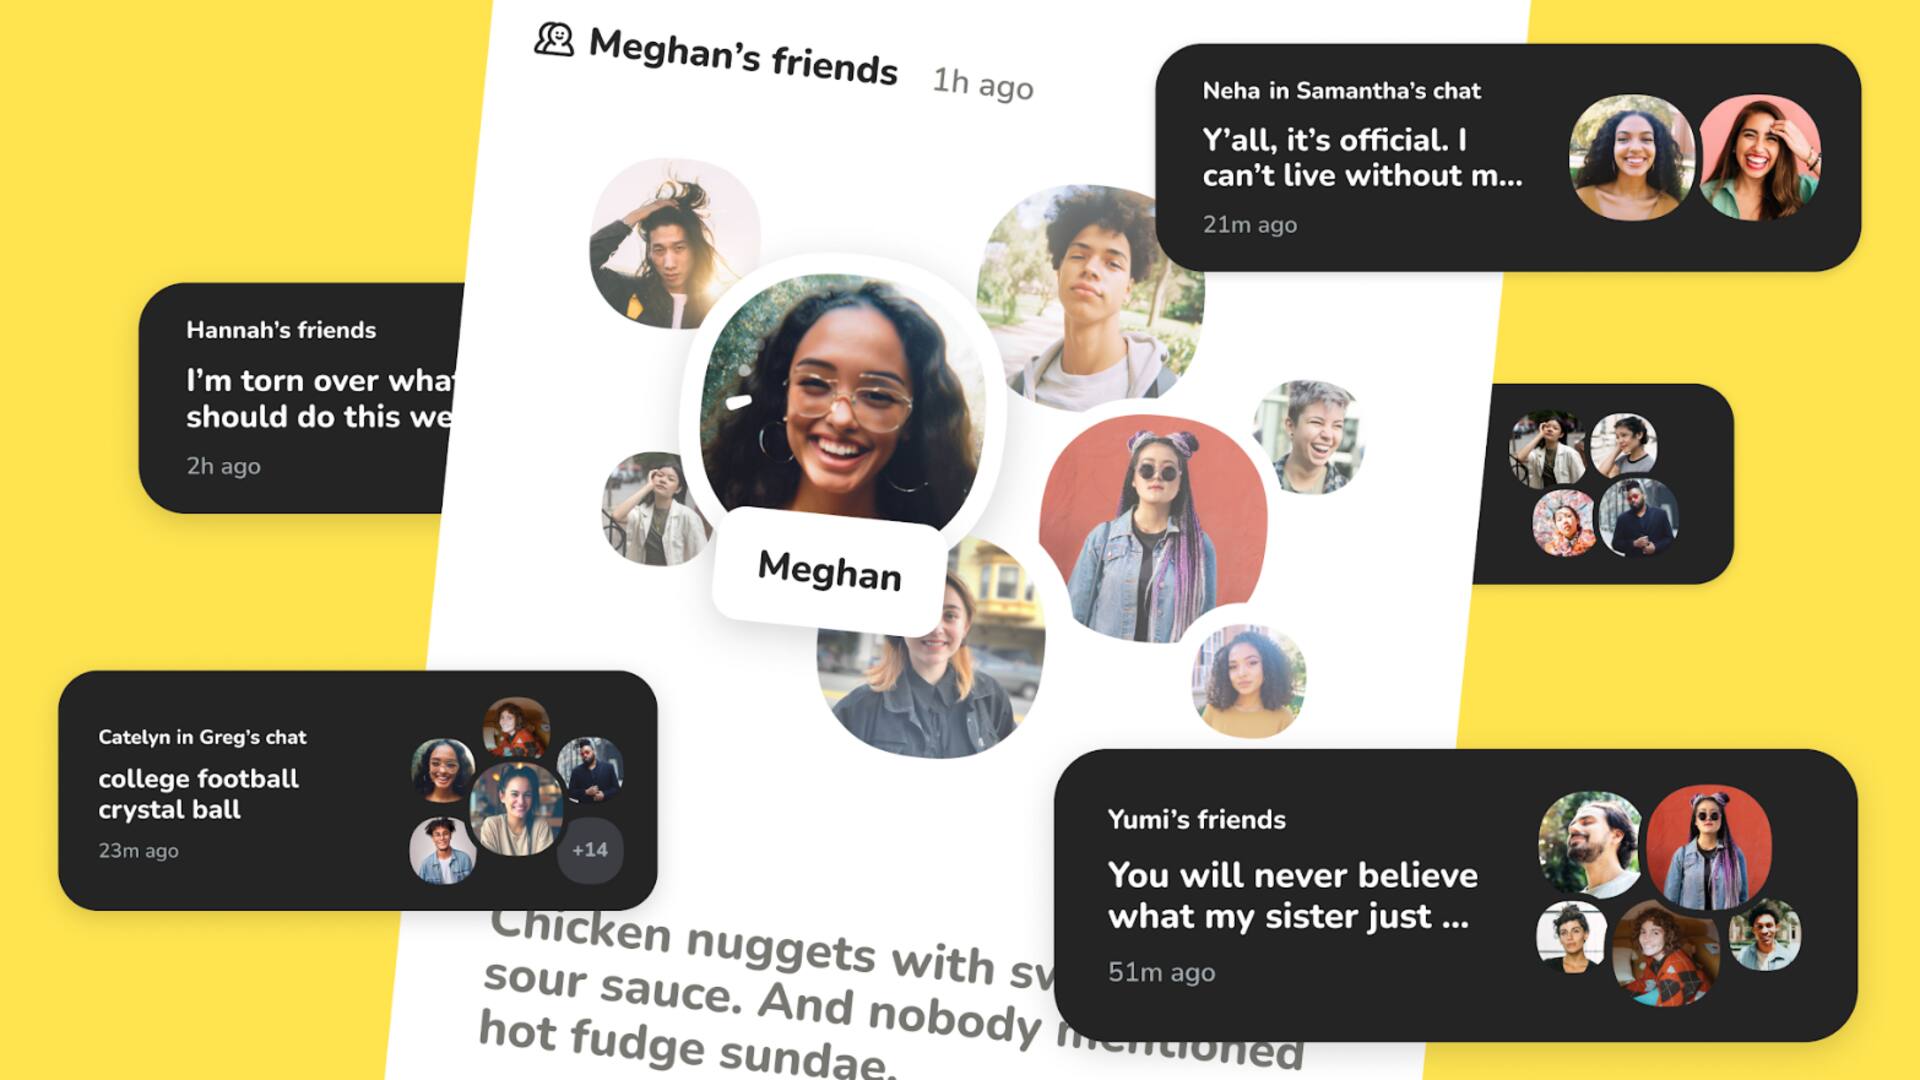 Clubhouse is transitioning from live audio to group messaging